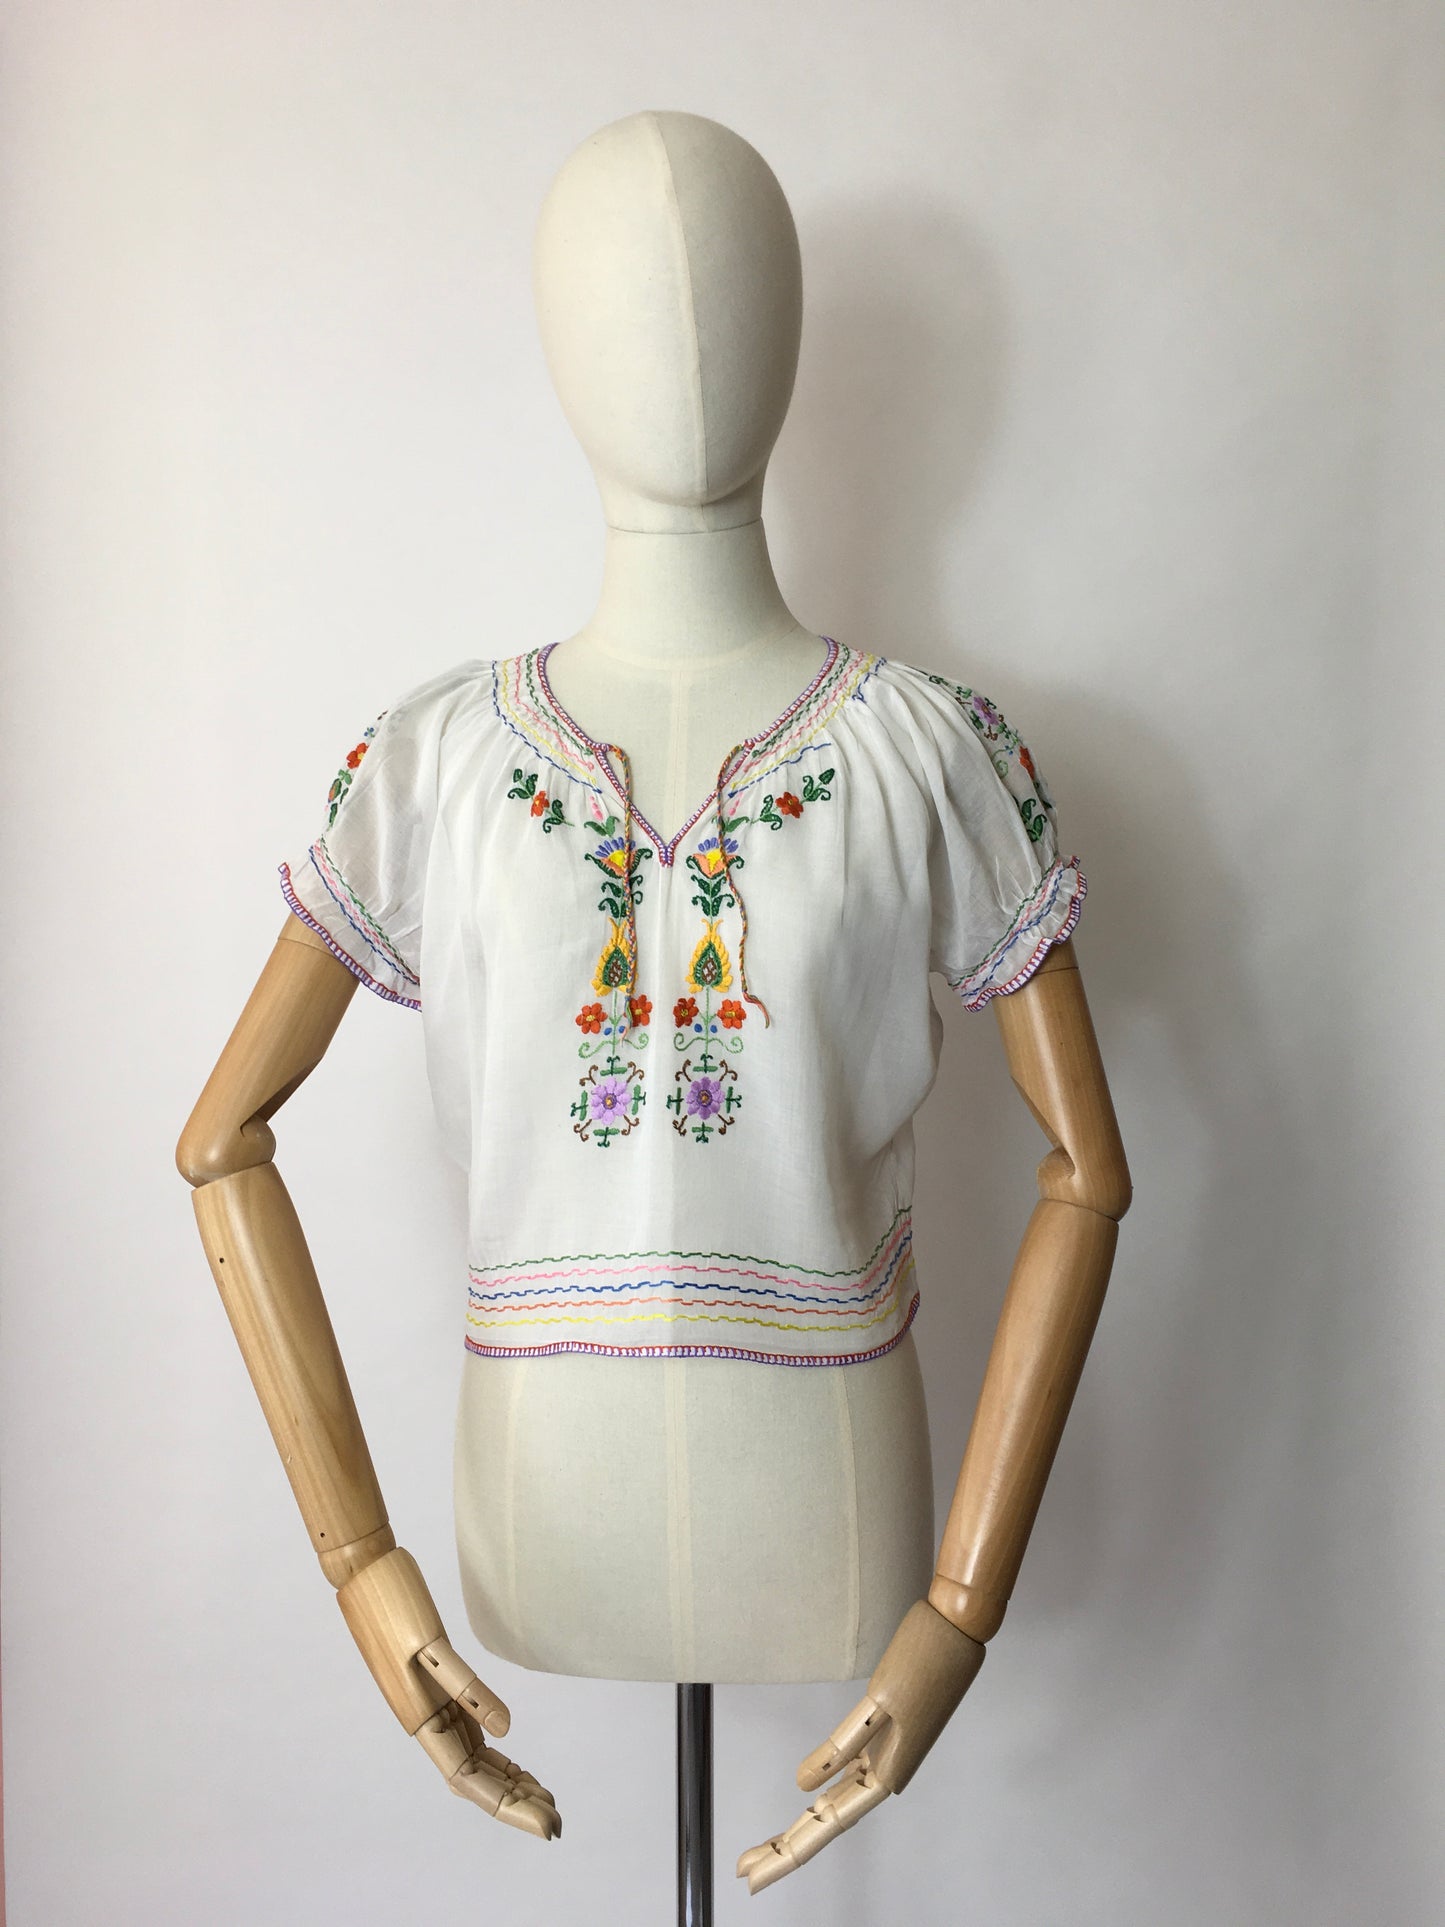 Original 1940’s Embroidered Blouse - Featuring Beautiful Embroidered Detailing in Rainbow Colours